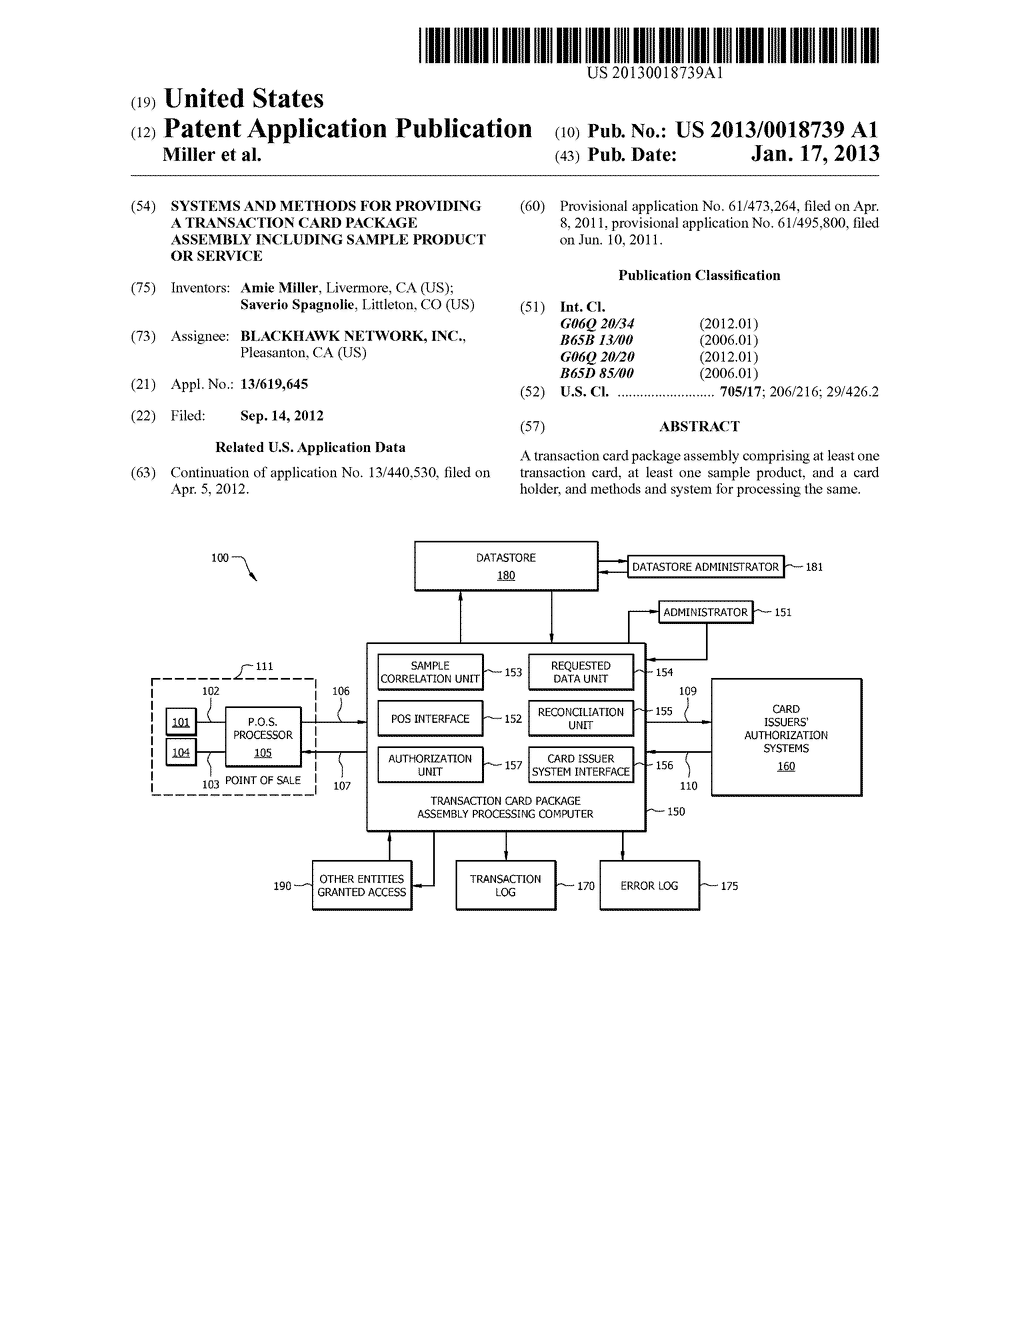 Systems and Methods for Providing a Transaction Card Package Assembly     Including Sample Product or Service - diagram, schematic, and image 01